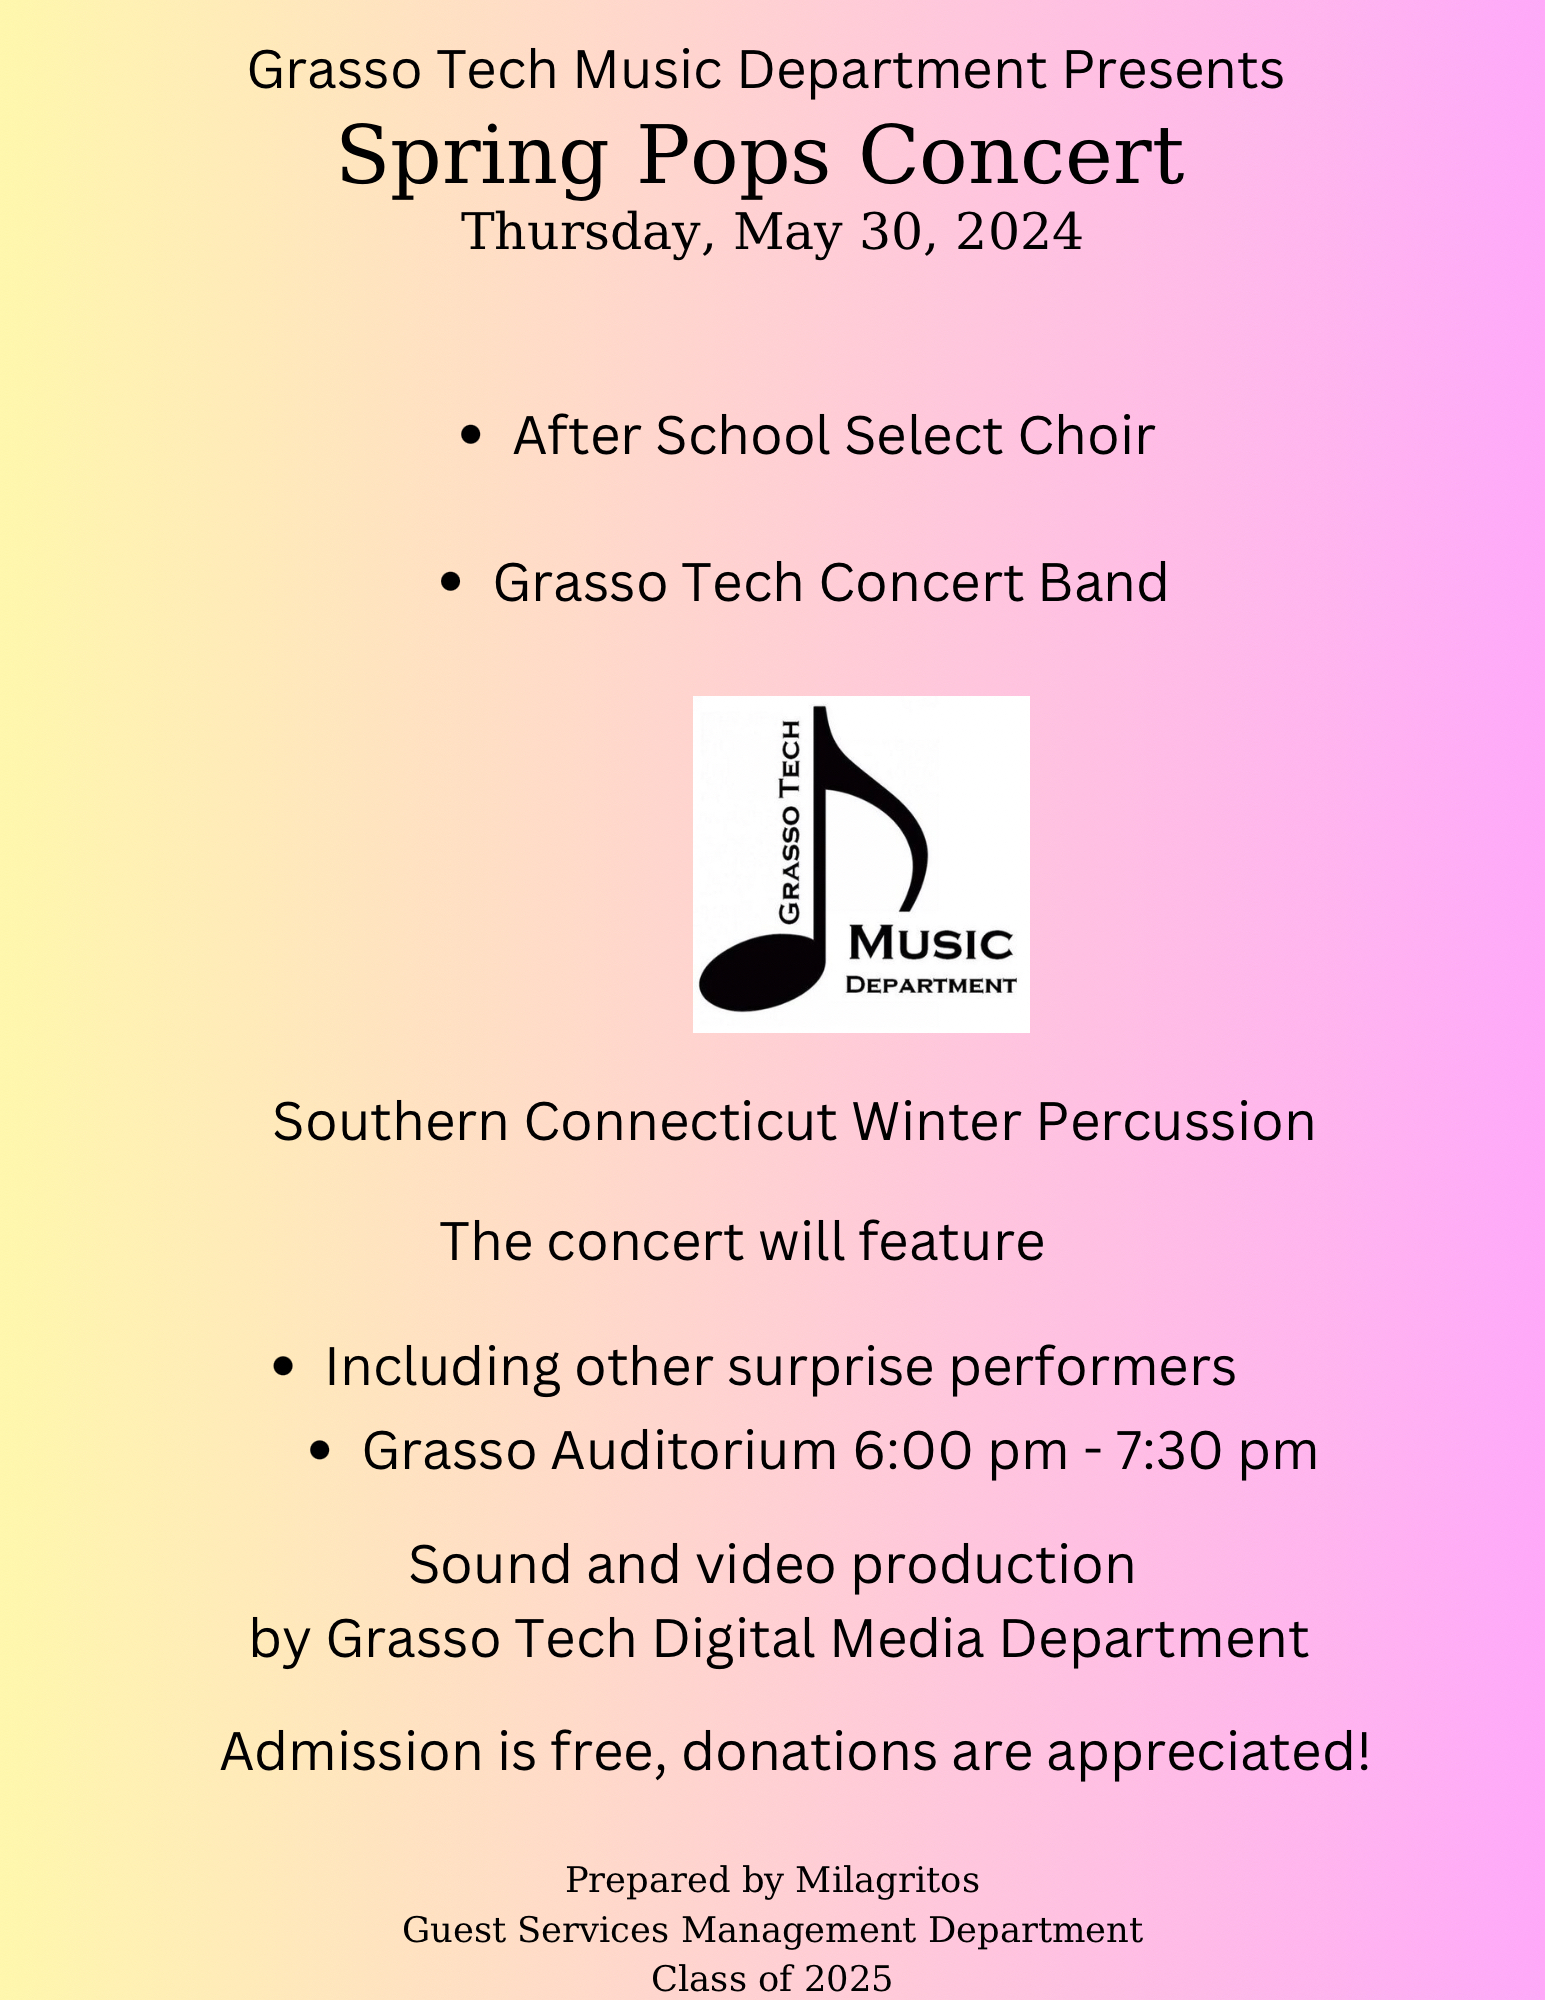 Grasso Tech Music's Spring Pops Concert - May 30, 2024 6:00 PM